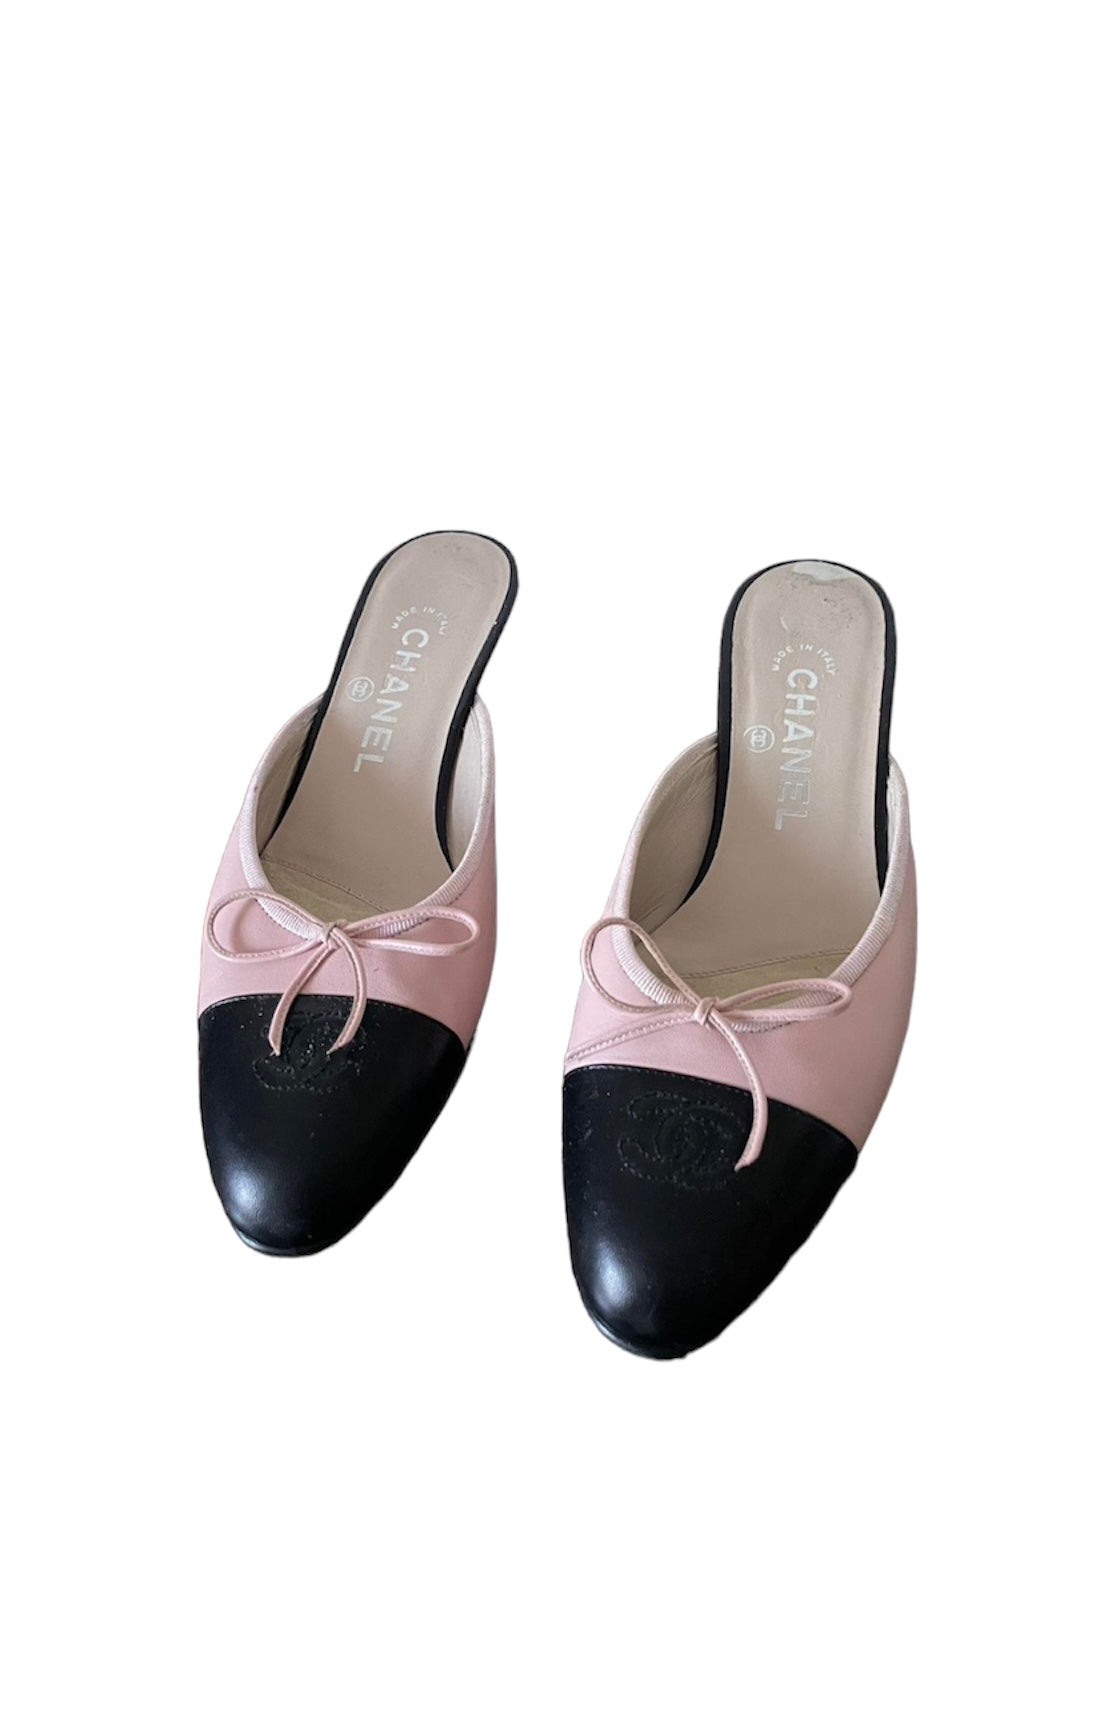 Vintage iconic Chanel pink mules